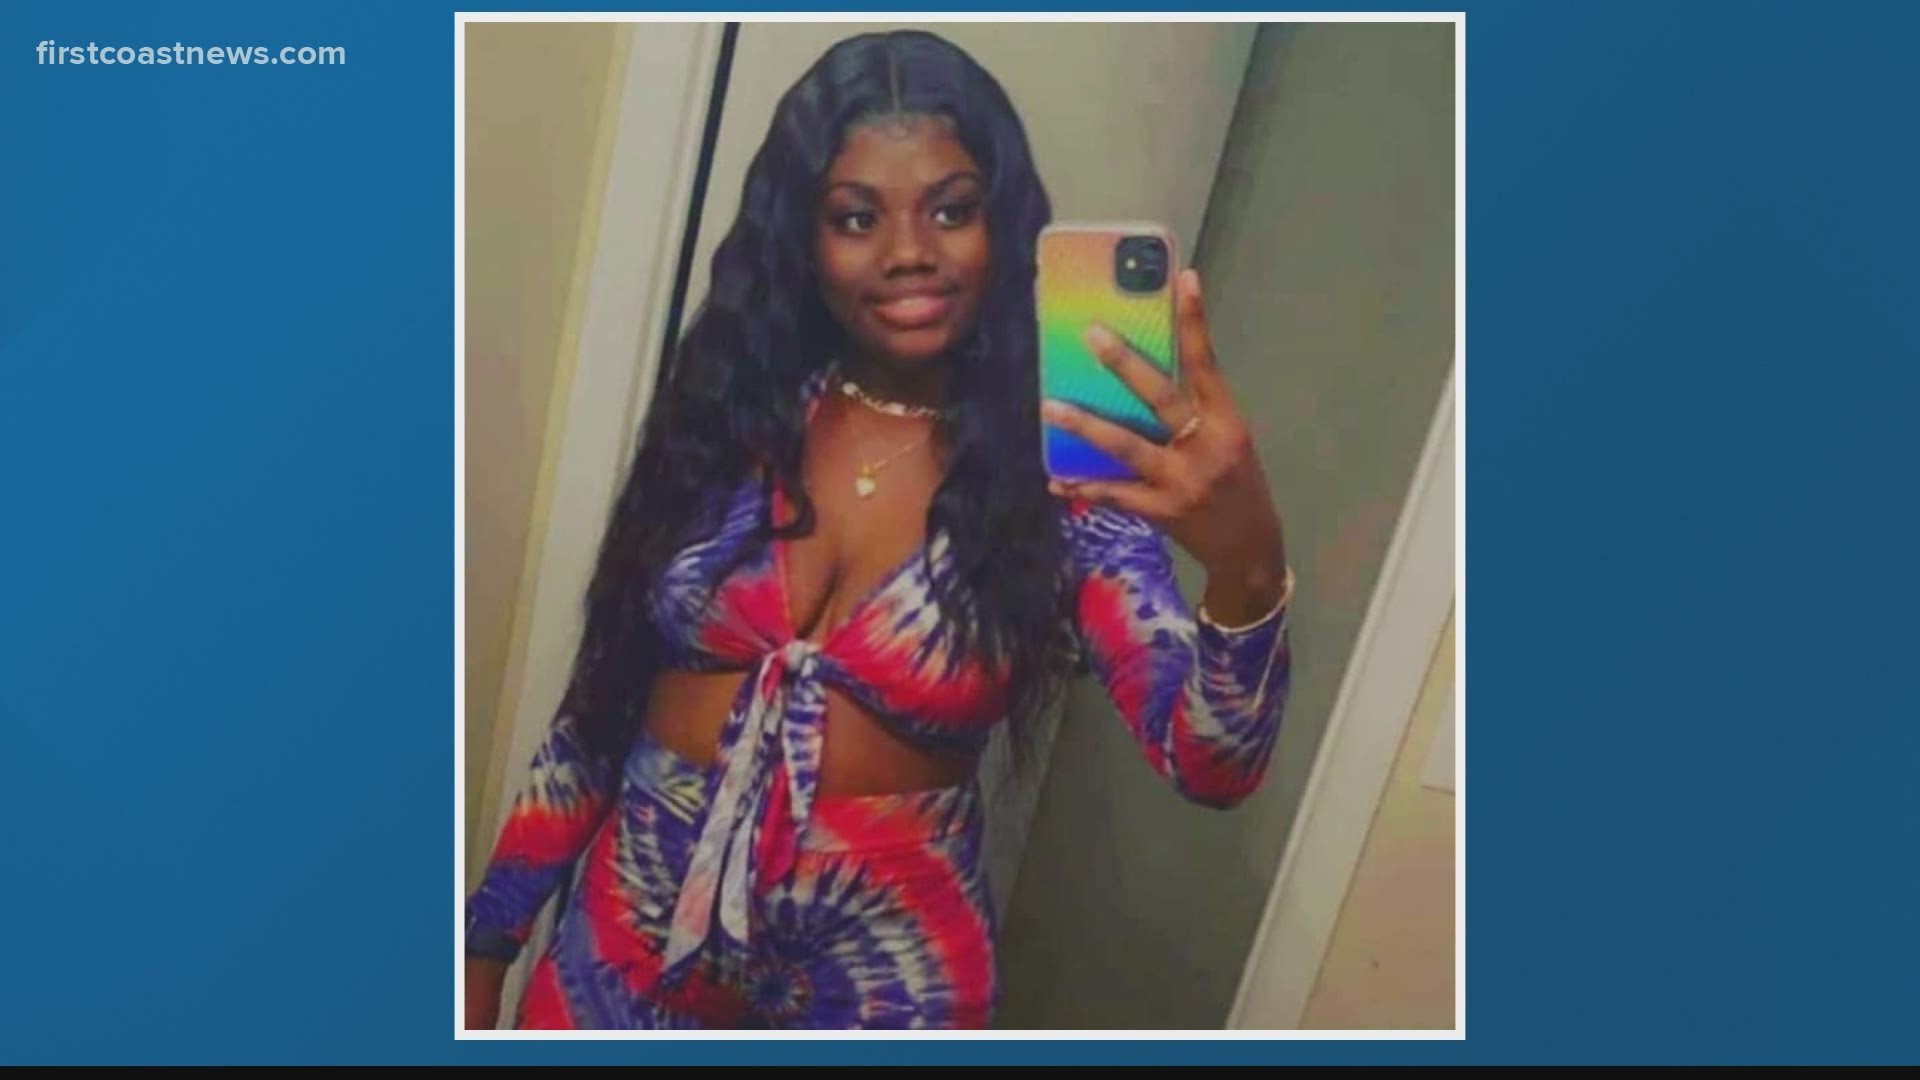 Nyeisha Ariona Nelson, 20, of Crescent City was reported missing by her family Wednesday afternoon after she was not seen for several days.